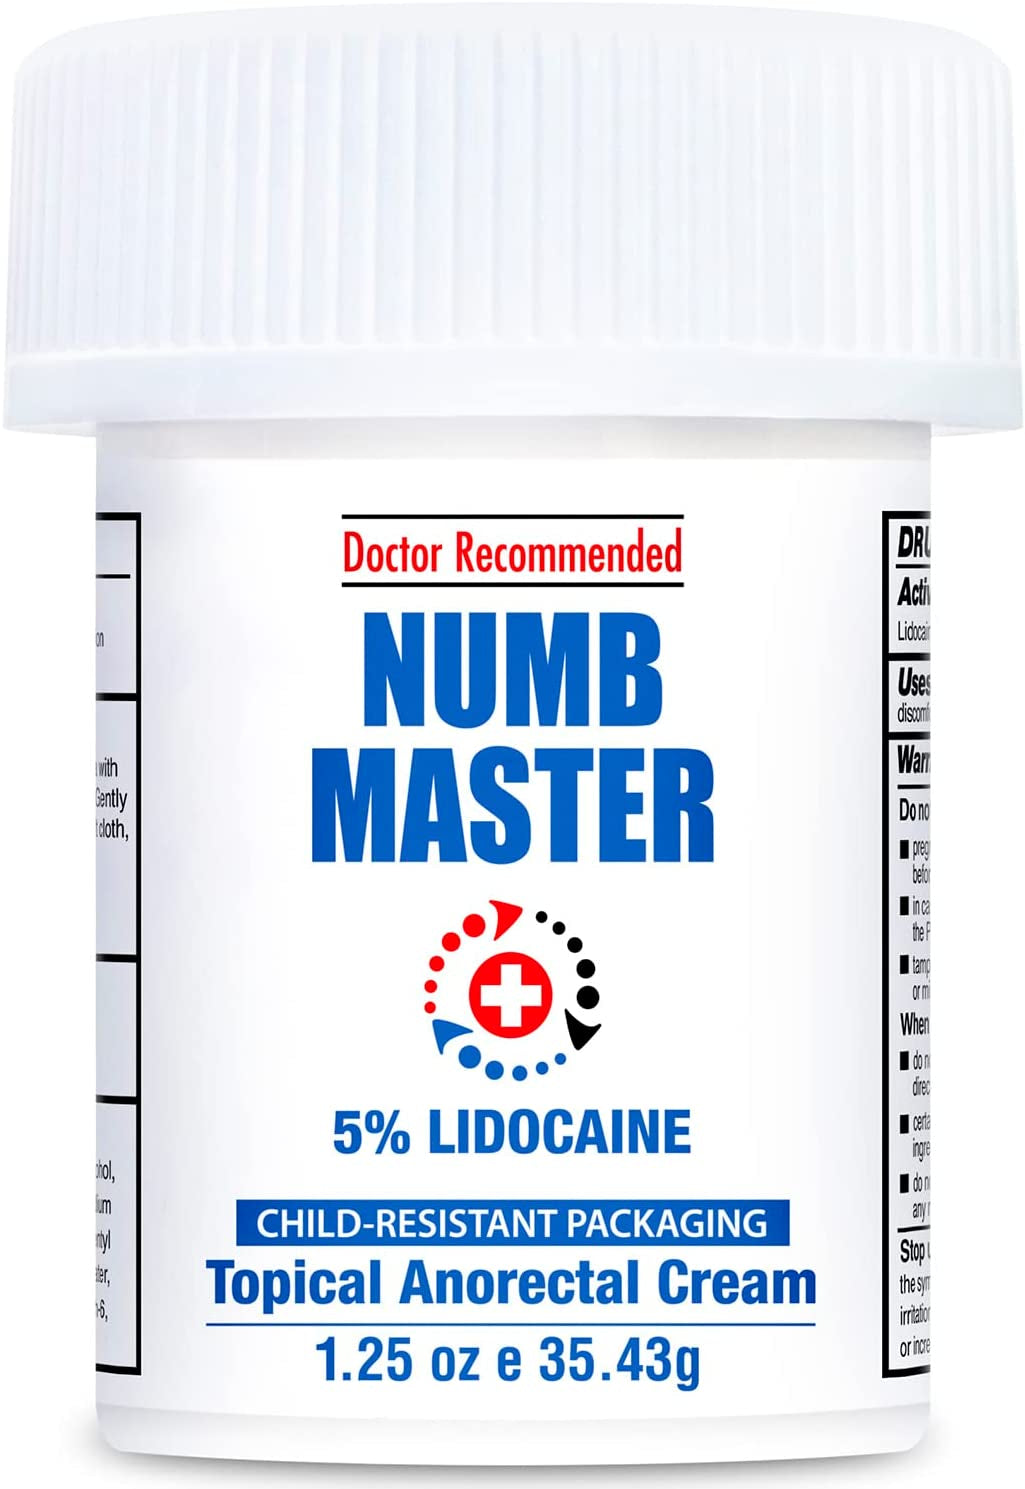 Numb Master 5% Lidocaine Numbing Cream, Maximum Strength Fast Acting Pain Relief Cream 1.25 Oz, Long Lasting Topical Anesthetic Cream with Aloe Vera, Vitamin E for Relief of Pain, Burning and Soreness